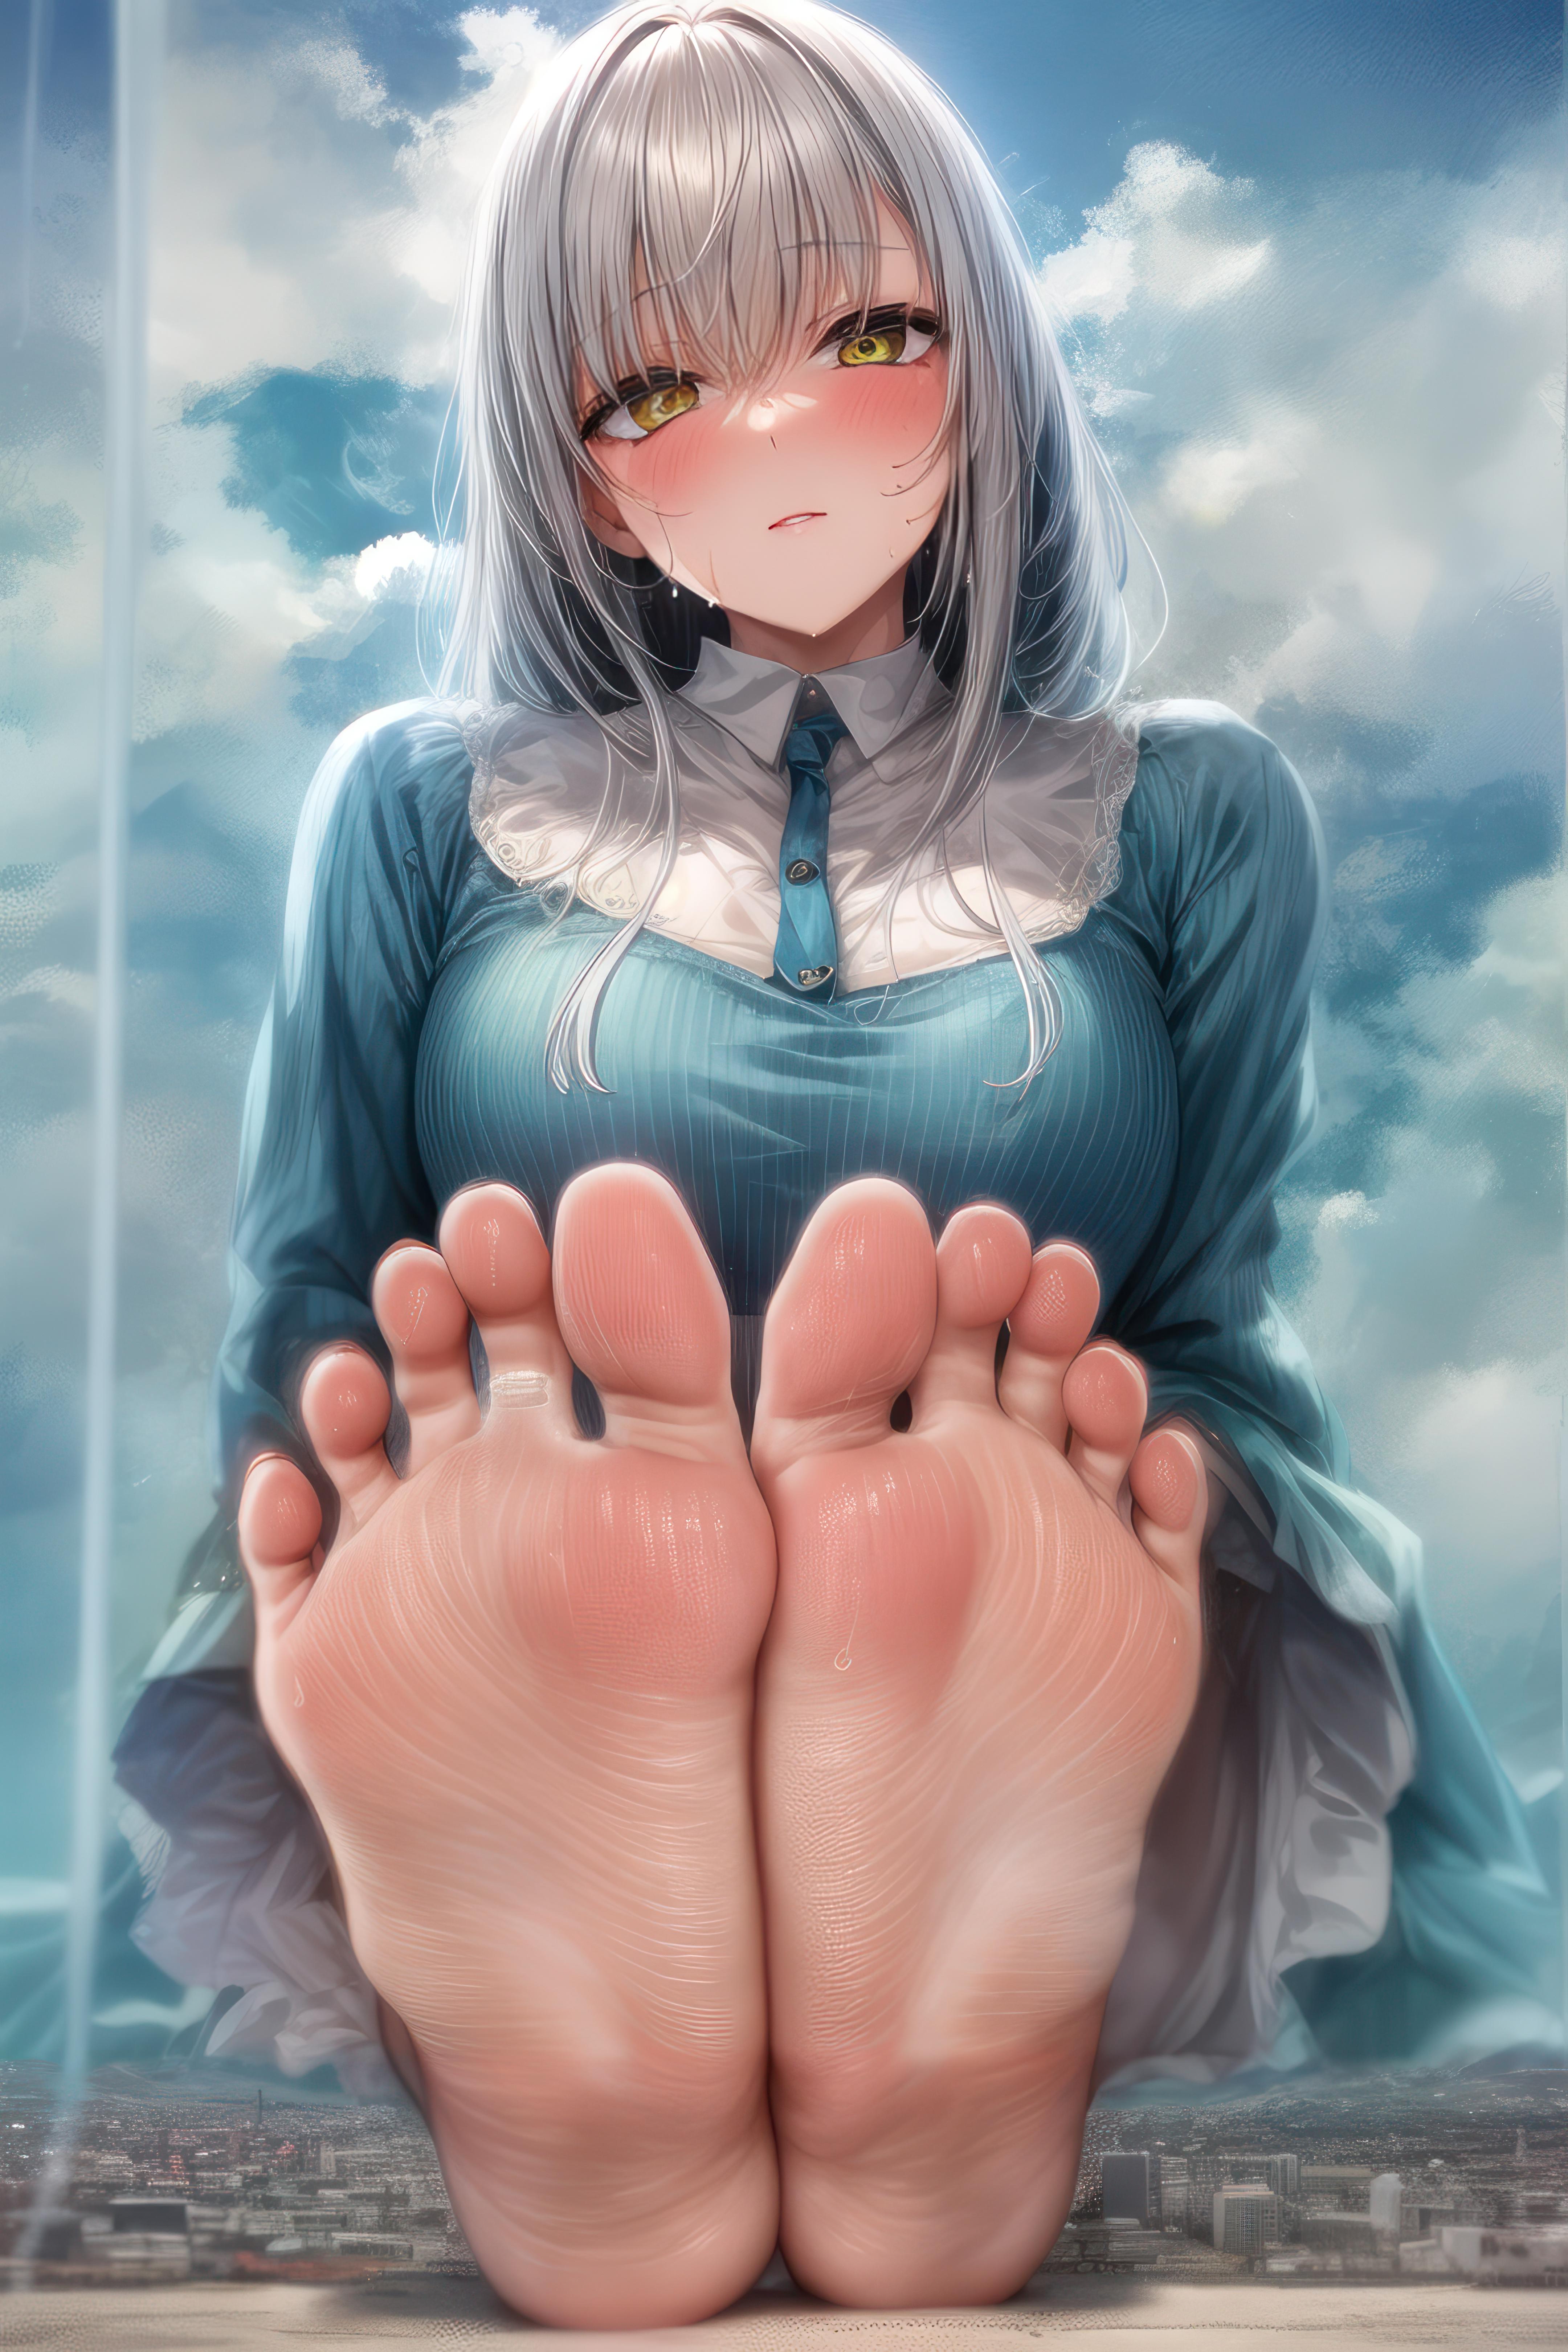 Giantess | Concept image by lupecanis571